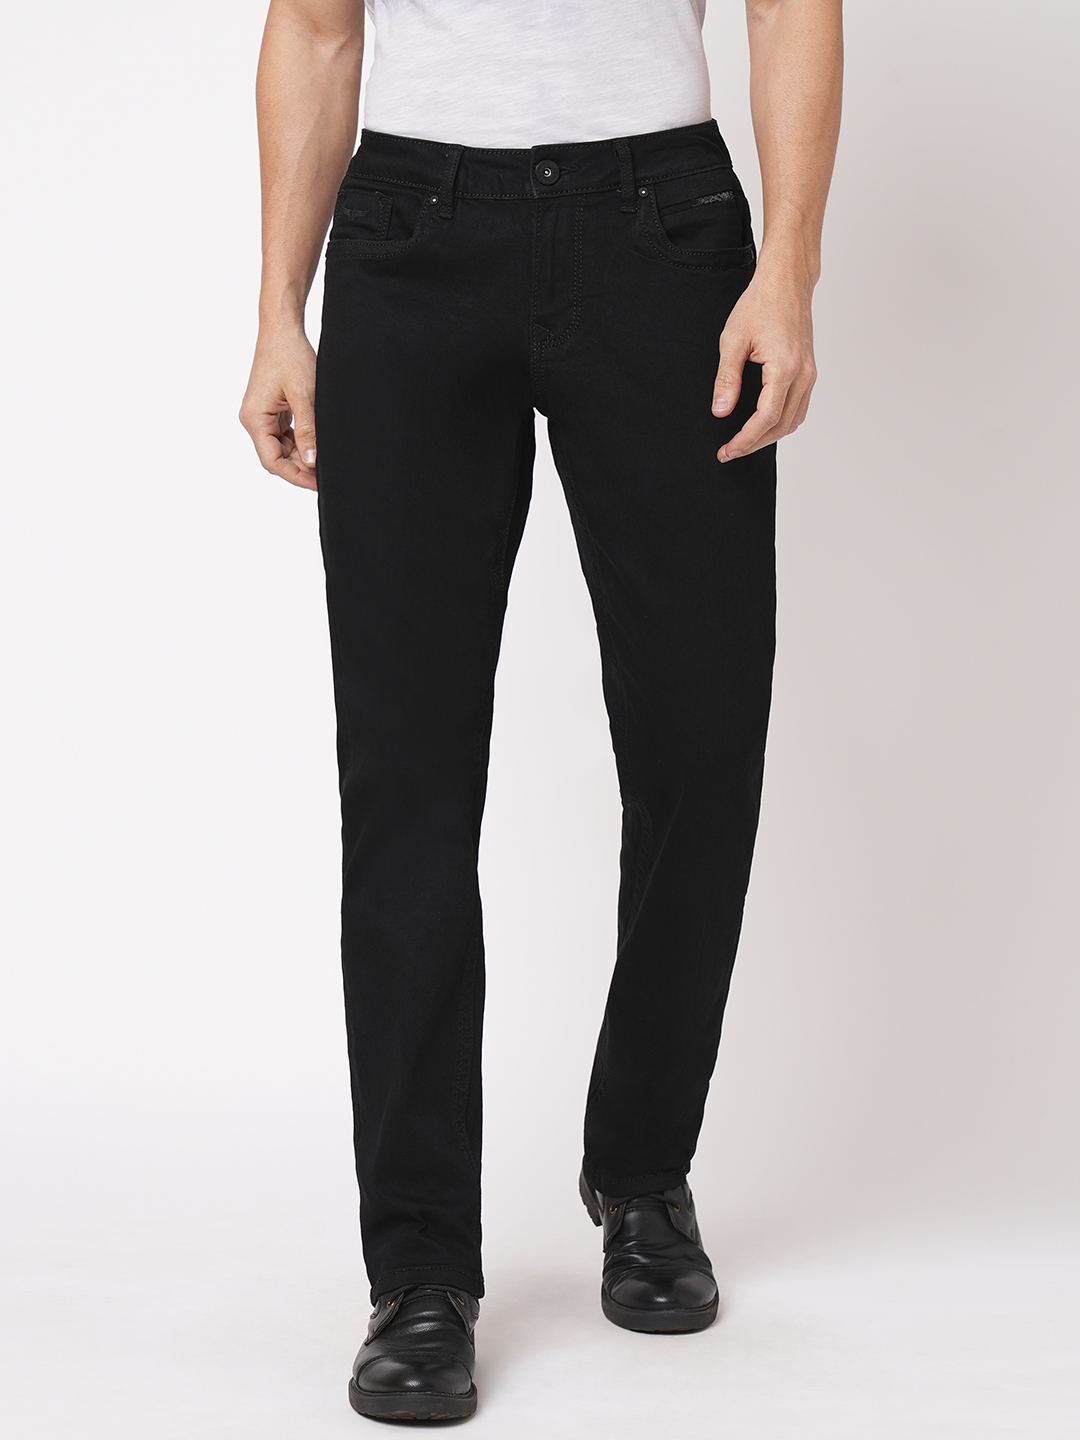 BLACK 5 POCKET MIDRISE, COMFORT AND STREIGHT FIT JEANS (JESSE FIT)